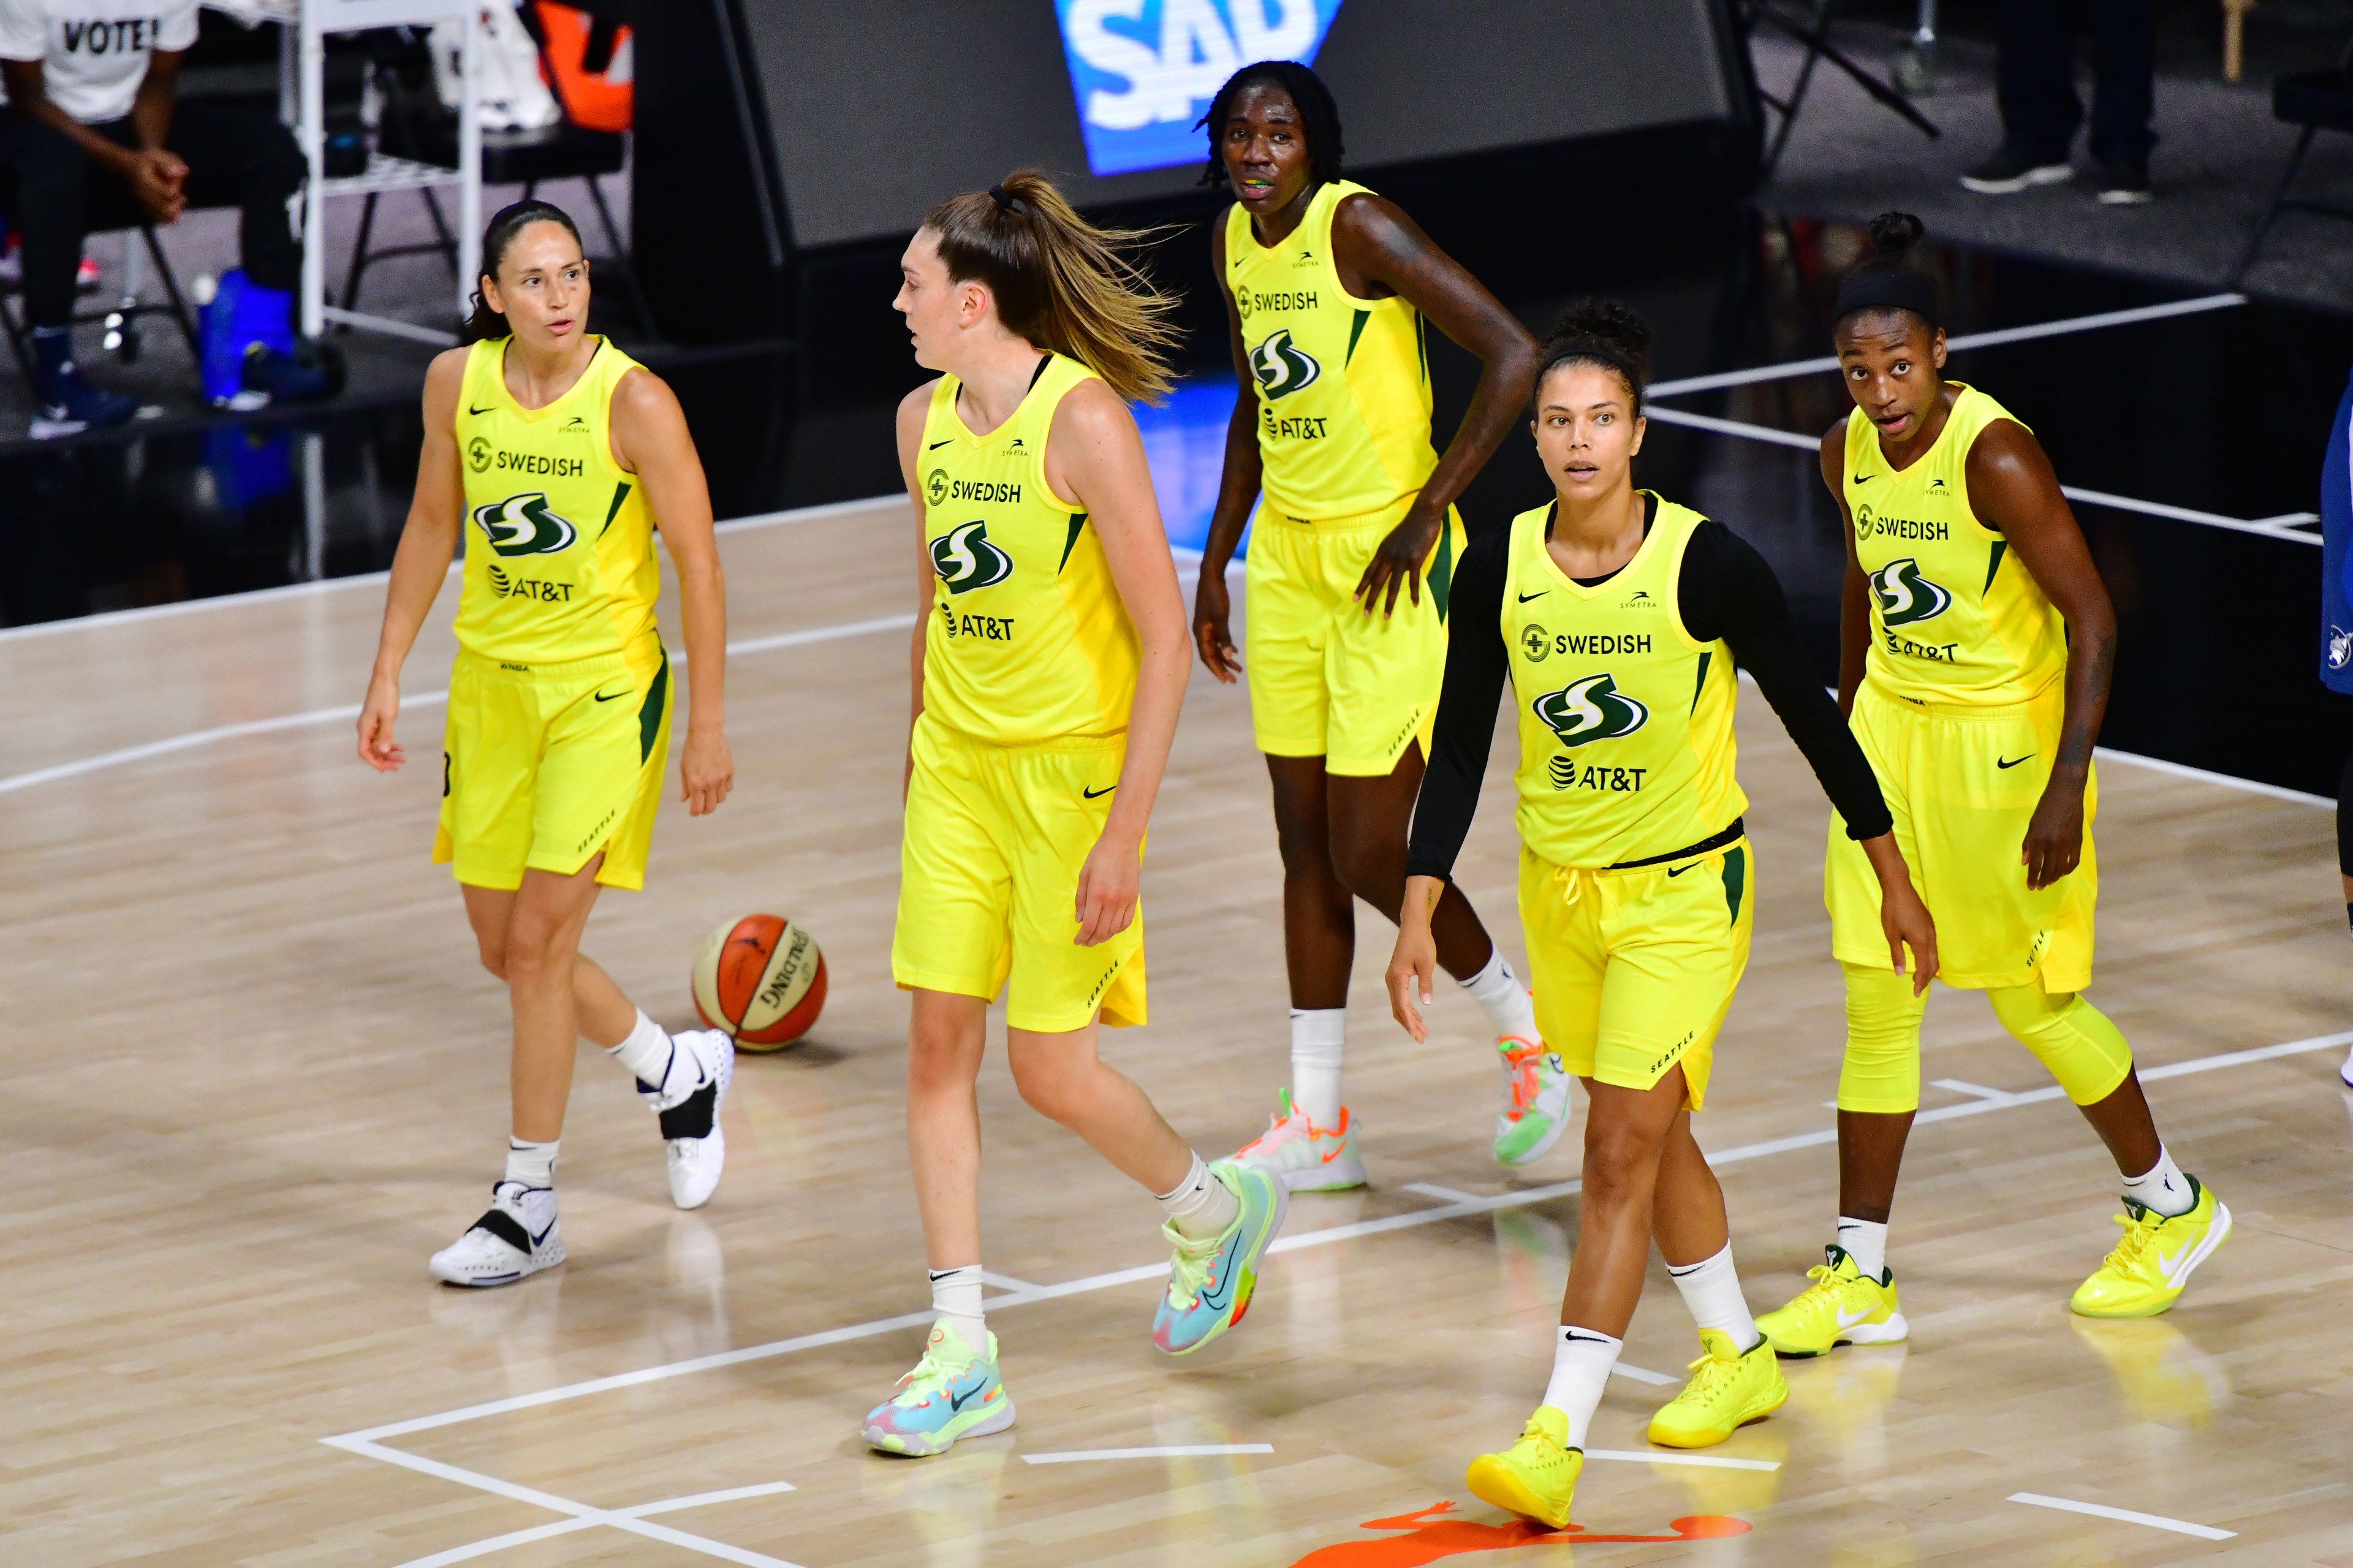 Sue Bird #10, Breanna Stewart #30, Natasha Howard #6, Alysha Clark #32, and Jewell Loyd #24 of the Seattle Storm walk across the court after a foul during the first half of Game One of their Third Round playoff against the Minnesota Lynx at Feld Entertainment Center on September 22, 2020 in Palmetto, Florida.